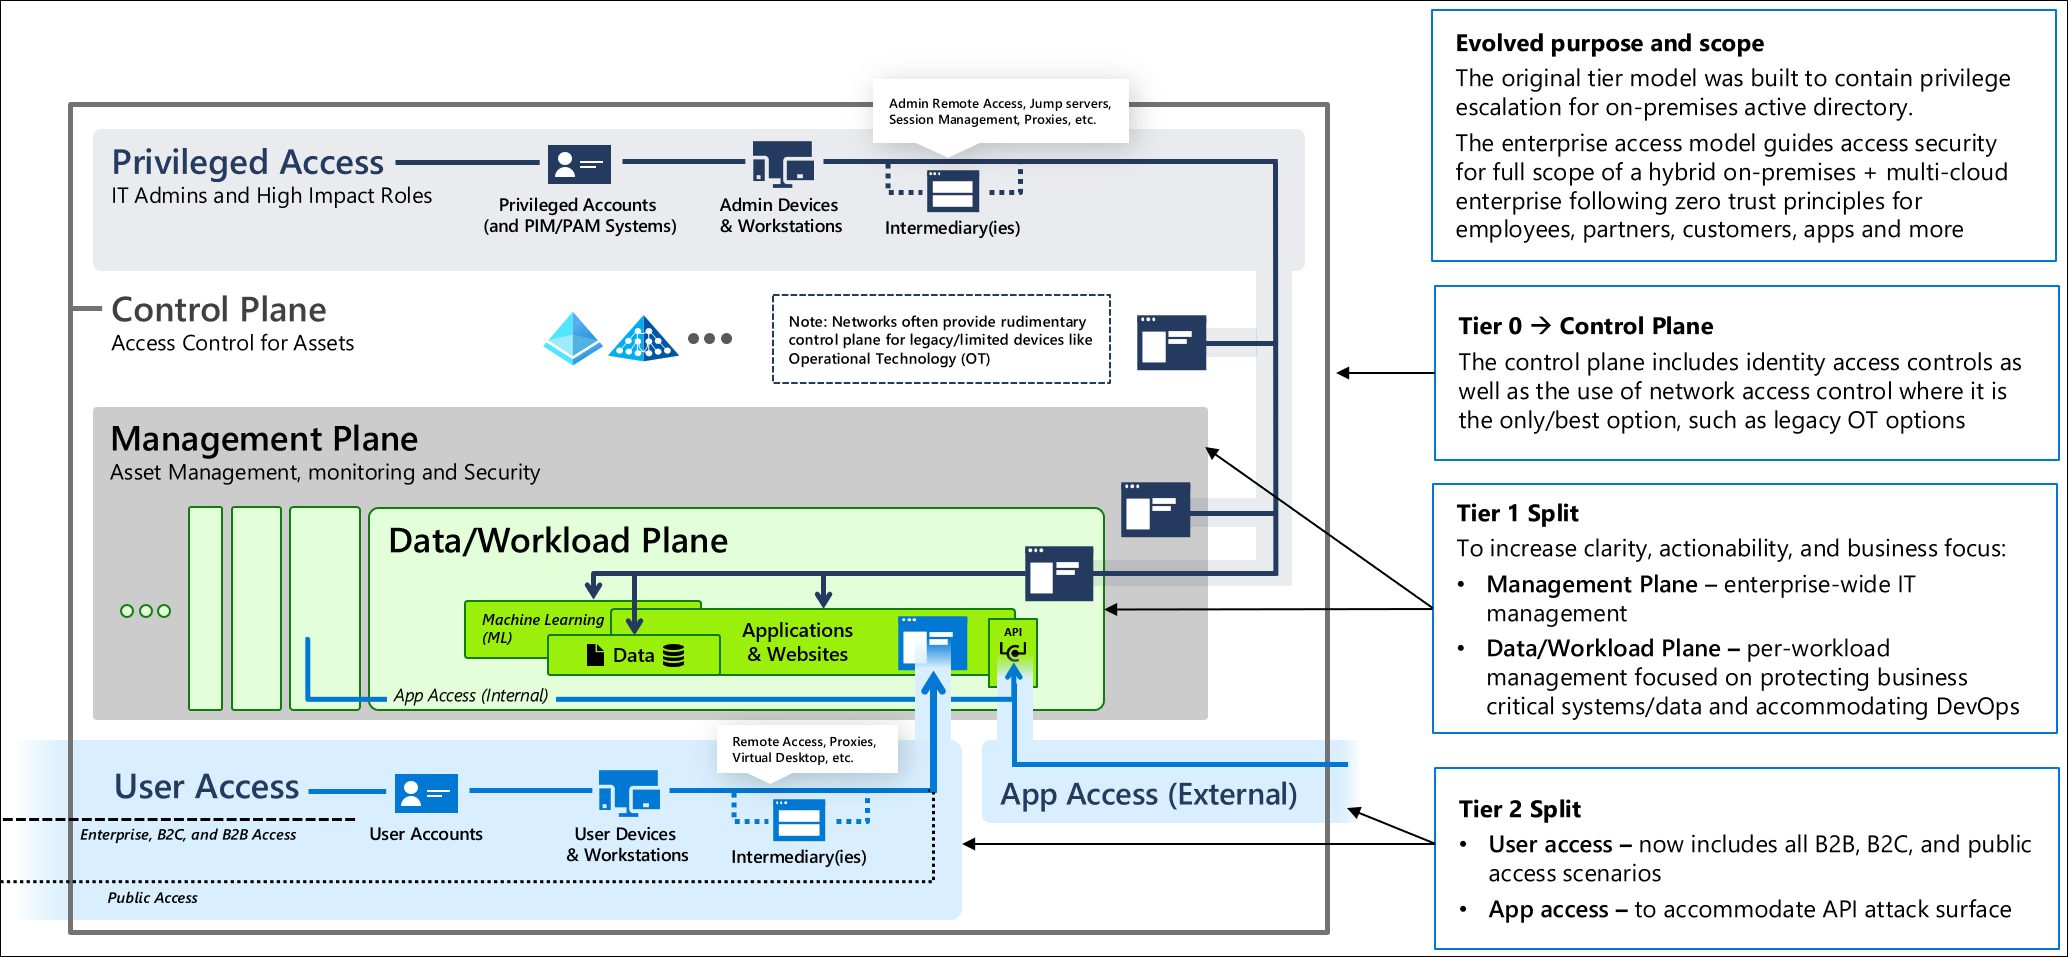 Diagram showing an enterprise access model with privileged access, control plane, management plane and user access.